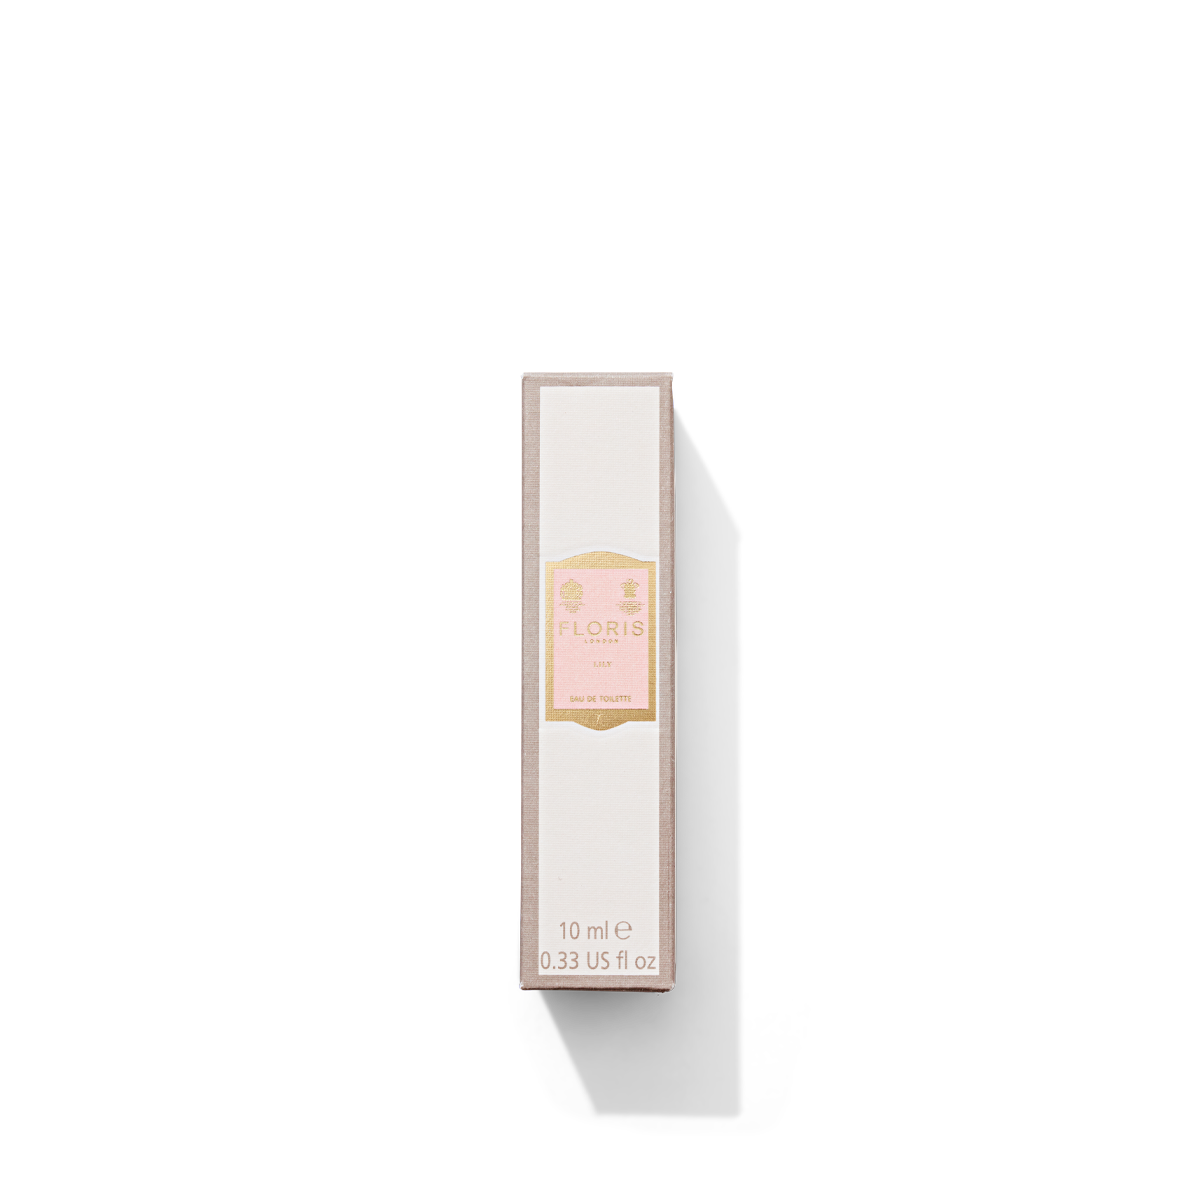 Small grey box with light pink and gold label containing Lily Eau de Toilette 